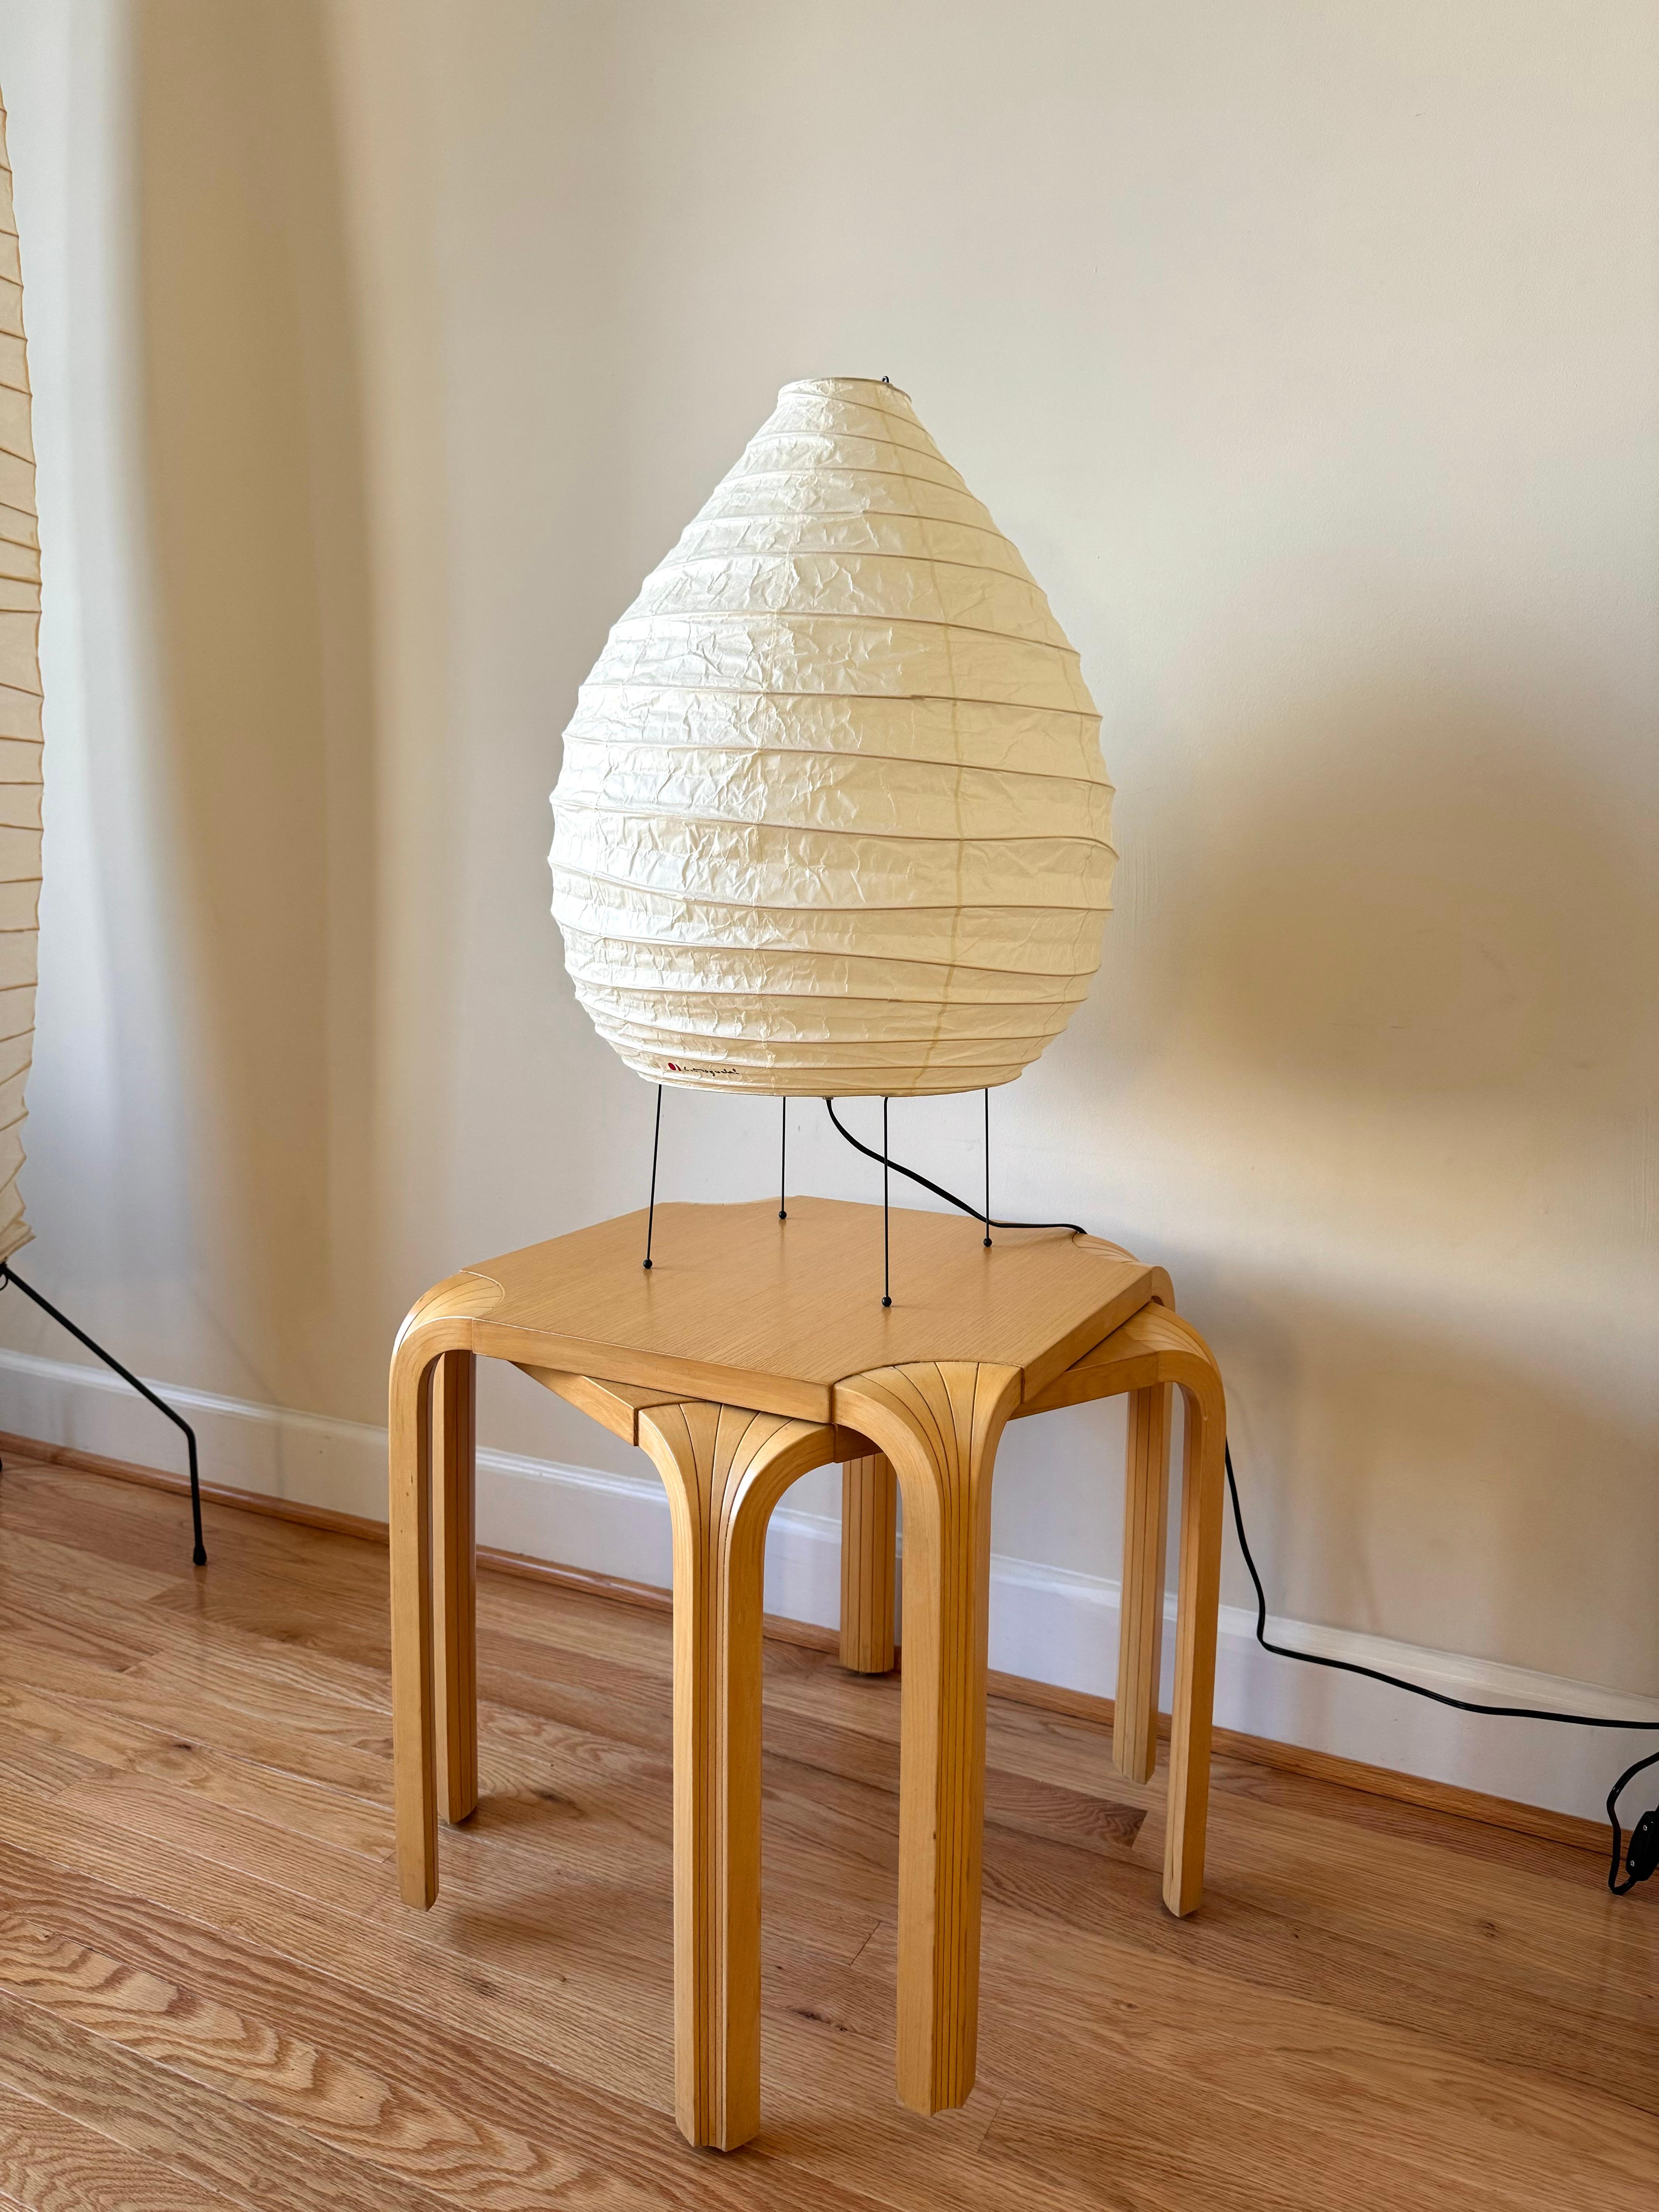 Isamu Noguchi Akari Light Sculpture, Model 22N Table Lamp In Excellent Condition For Sale In Centreville, VA